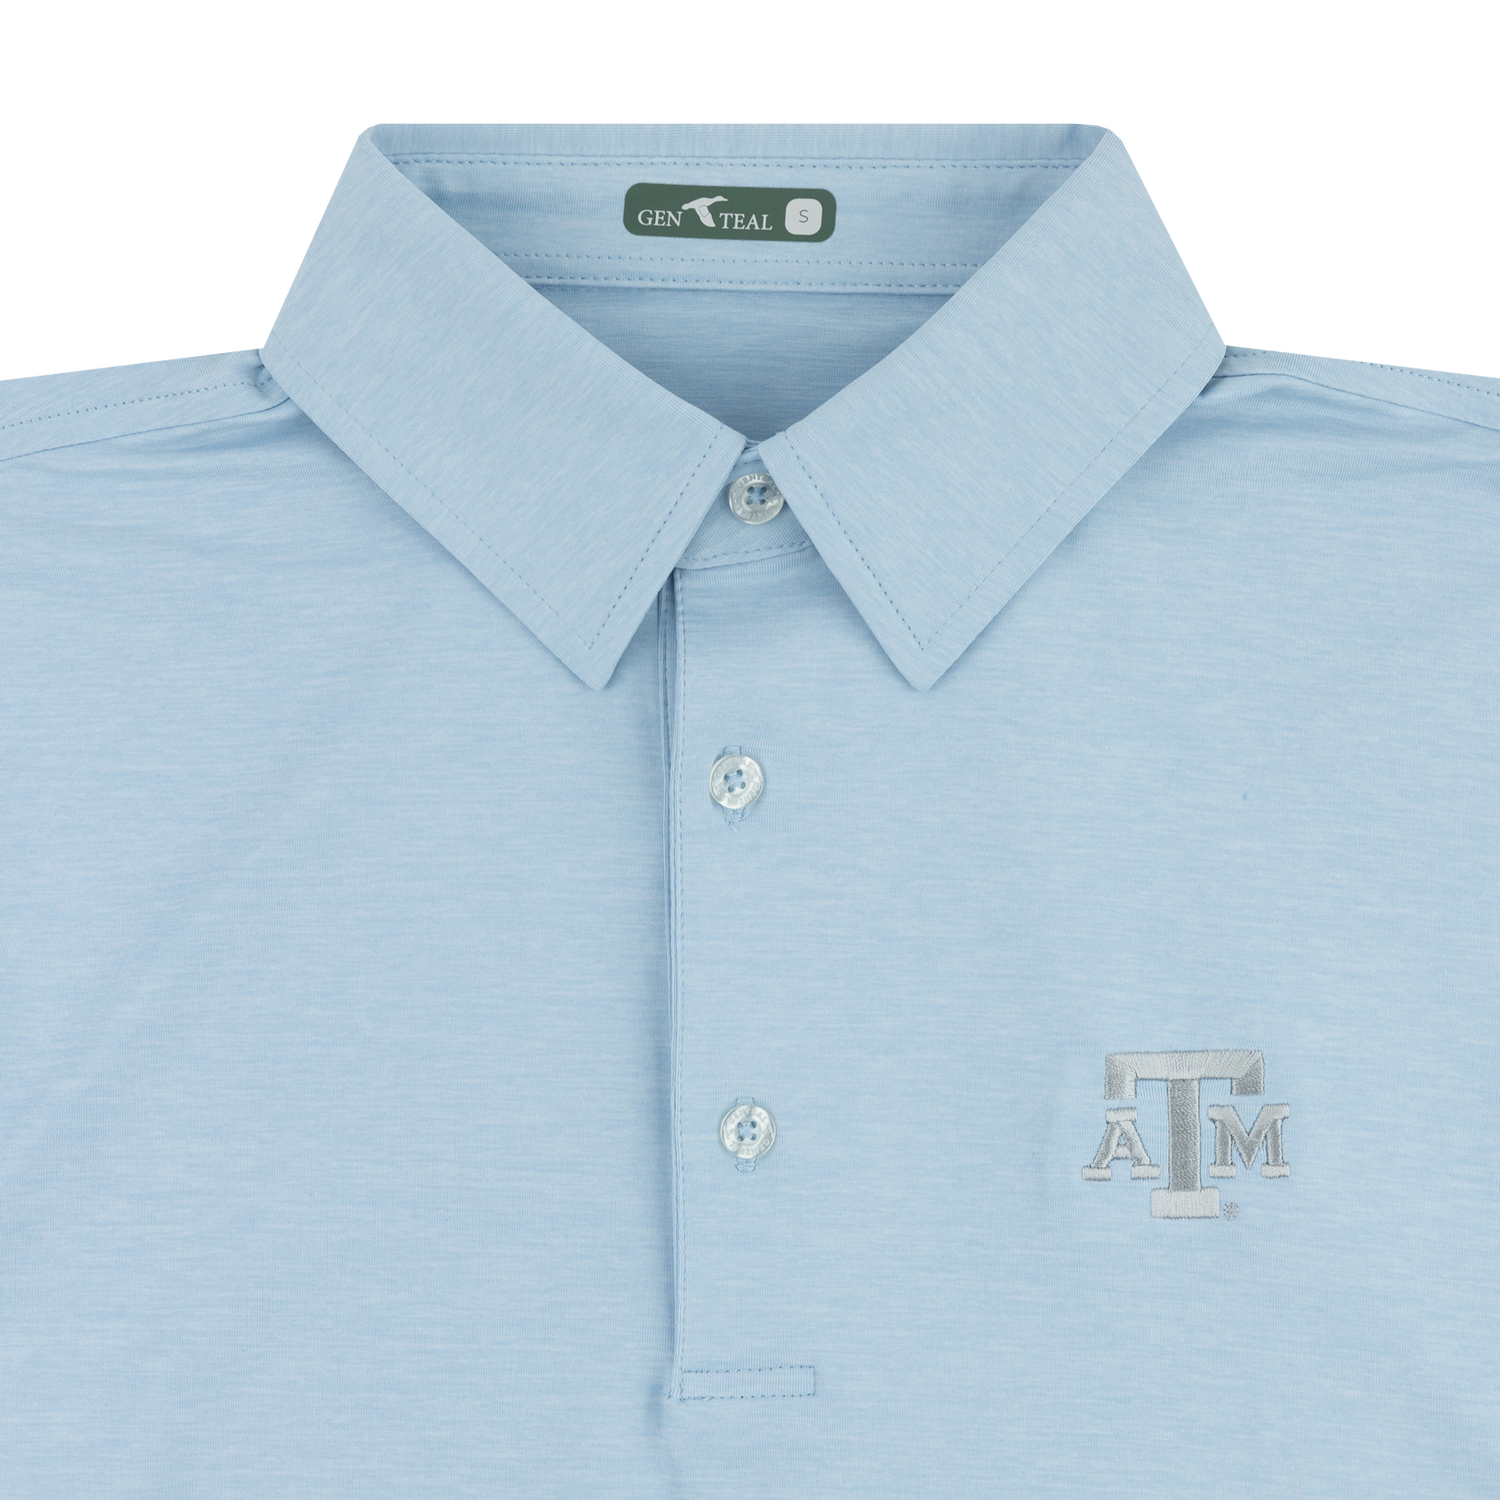 Texas A&M Gen Teal Heathered Brr Performance Polo